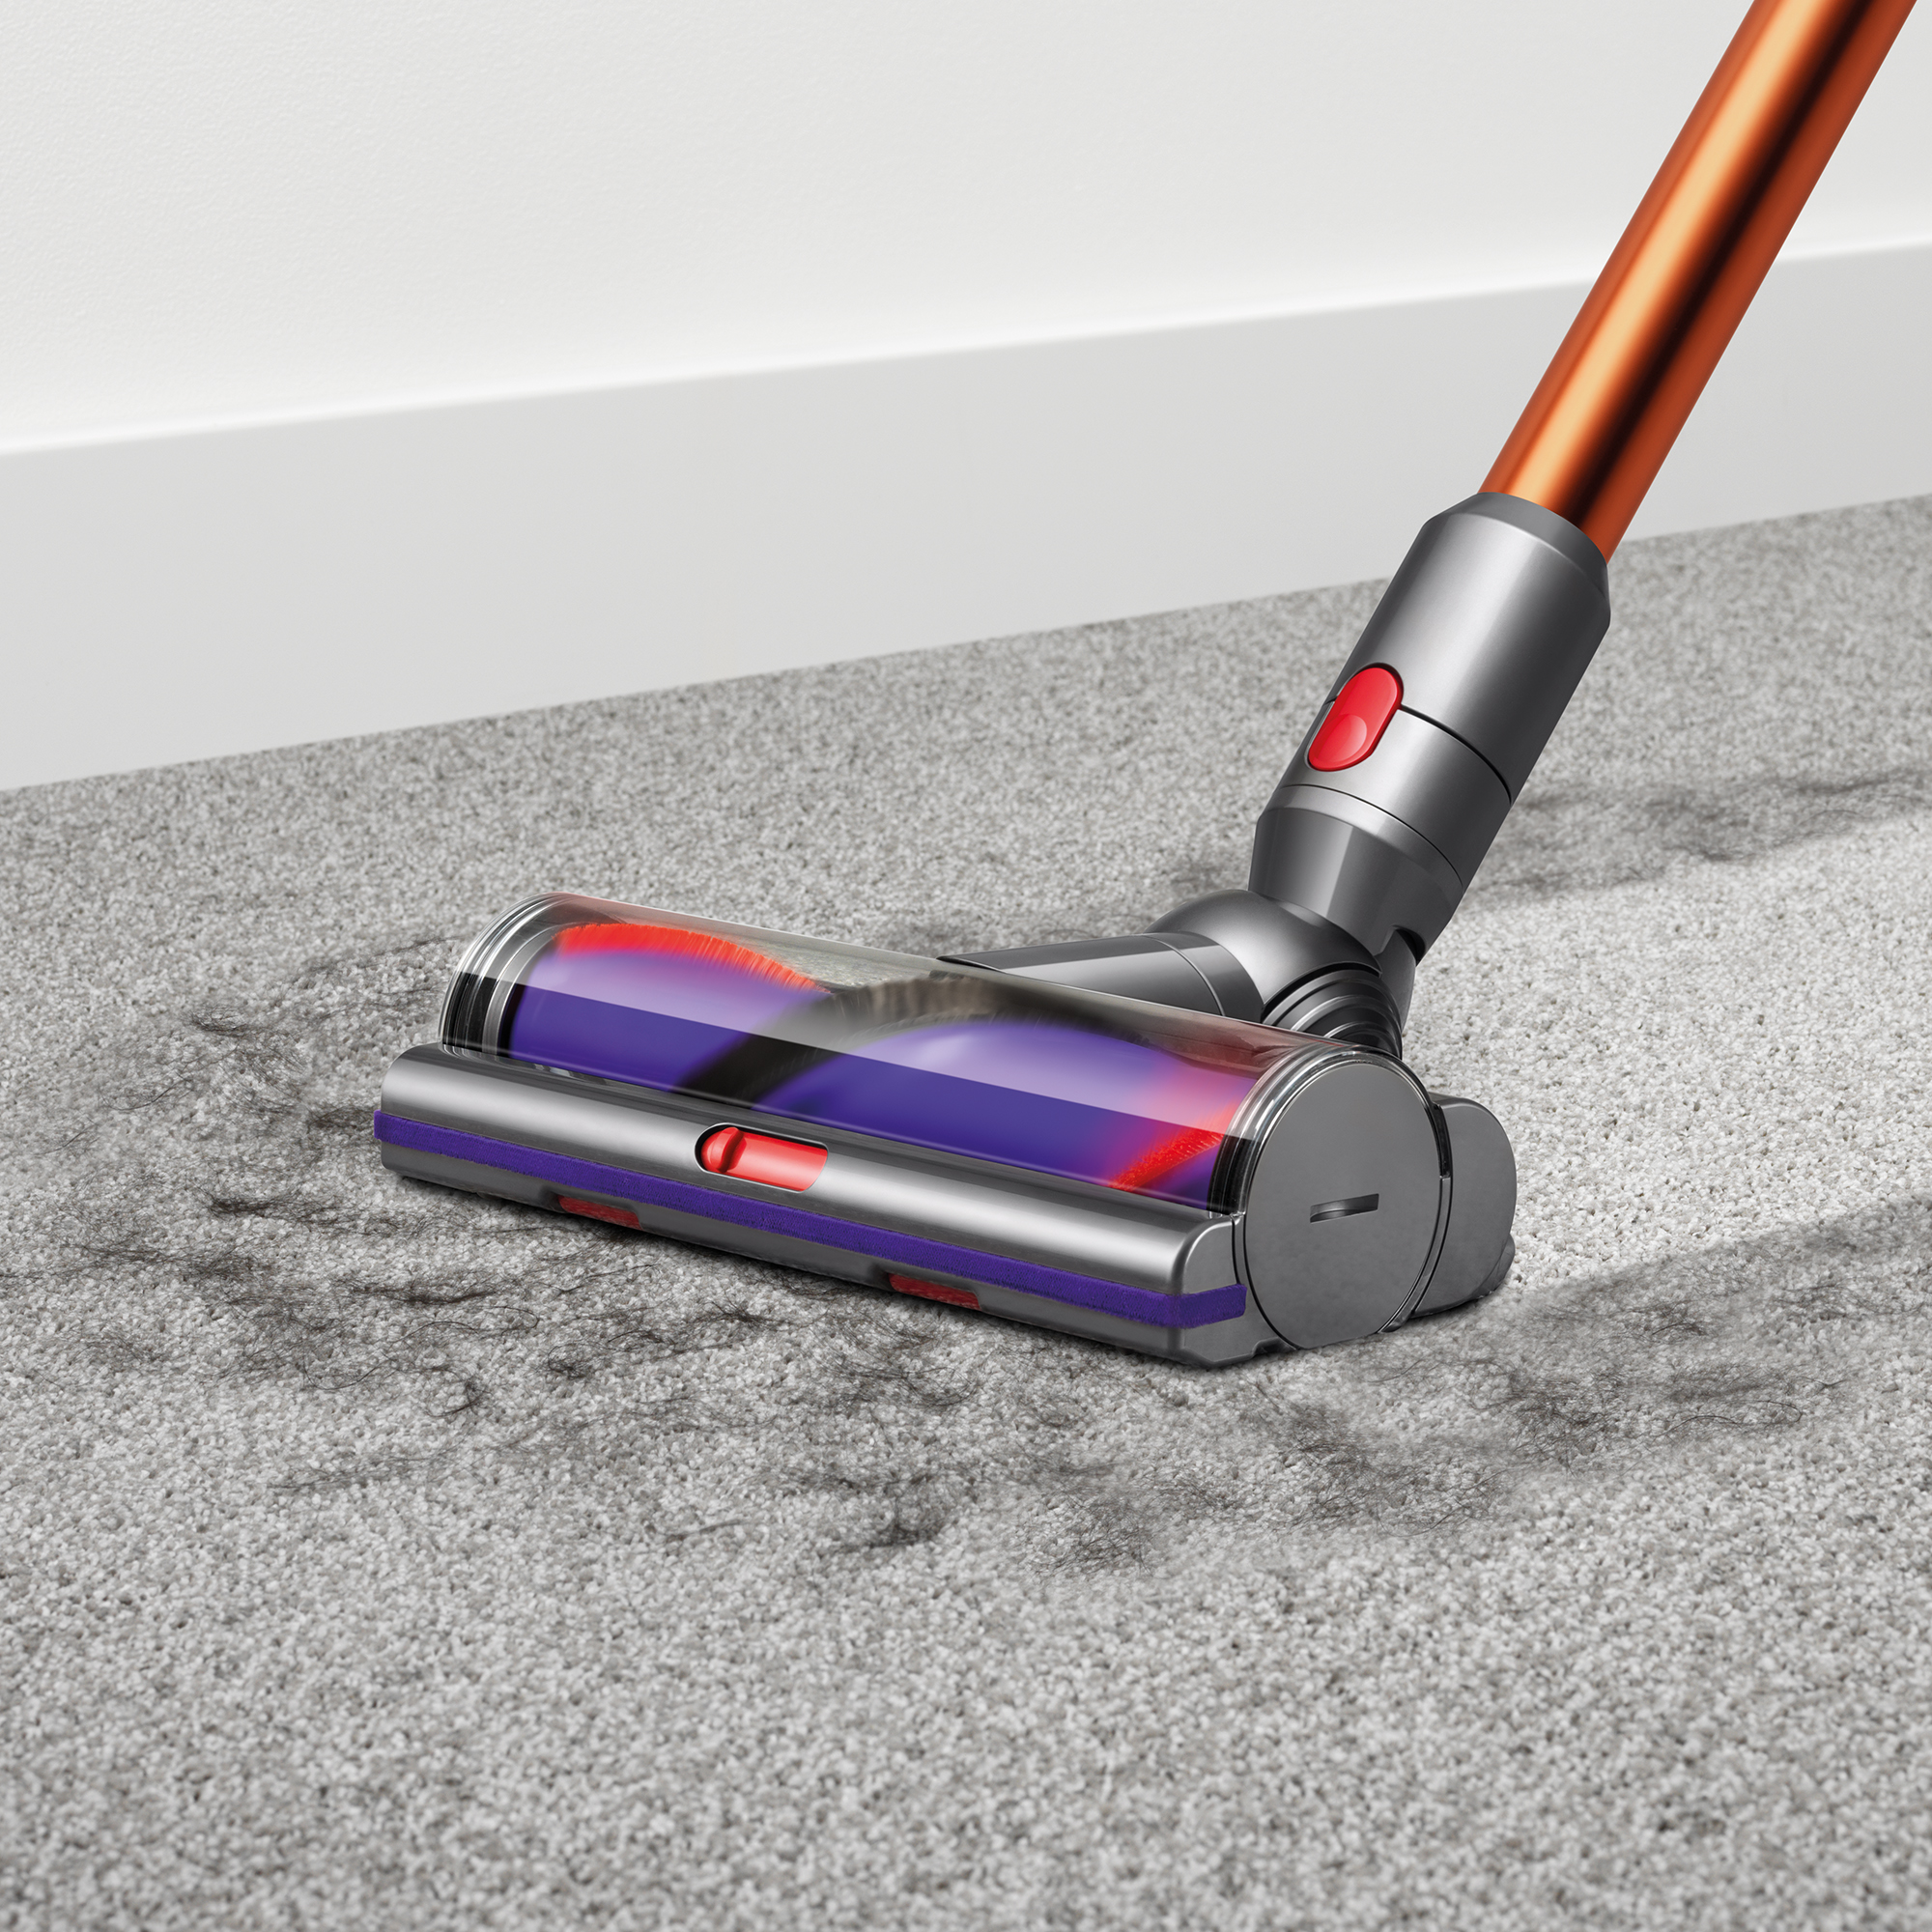 Dyson V10 Absolute Cordless Vacuum | Copper | Refurbished - image 3 of 7